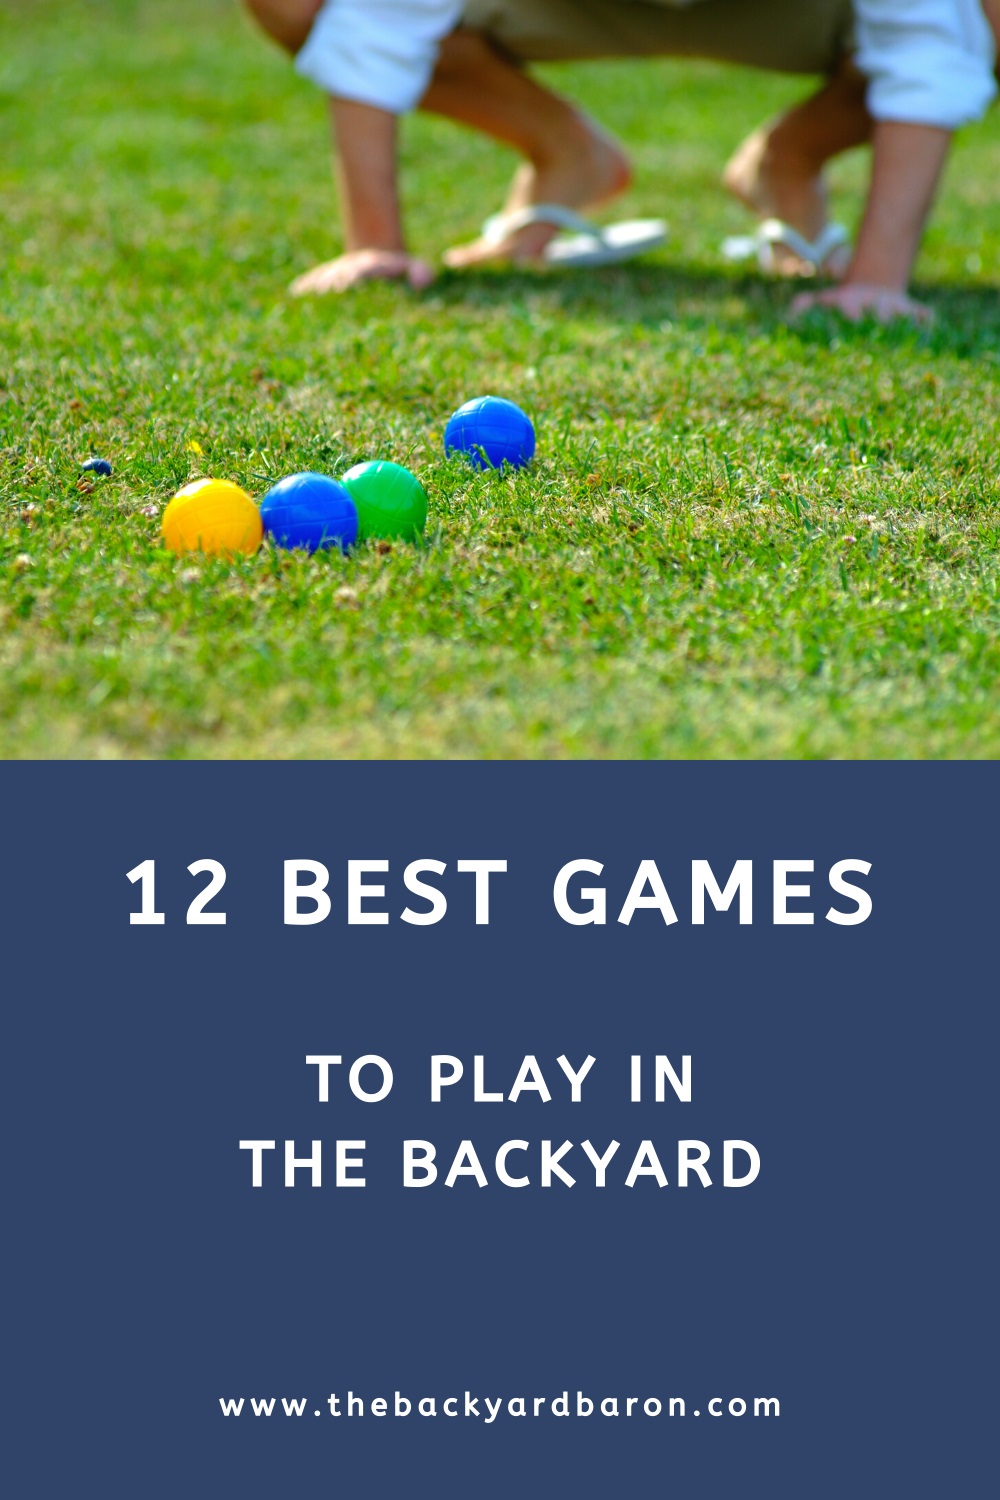 12 Best games for in the backyard